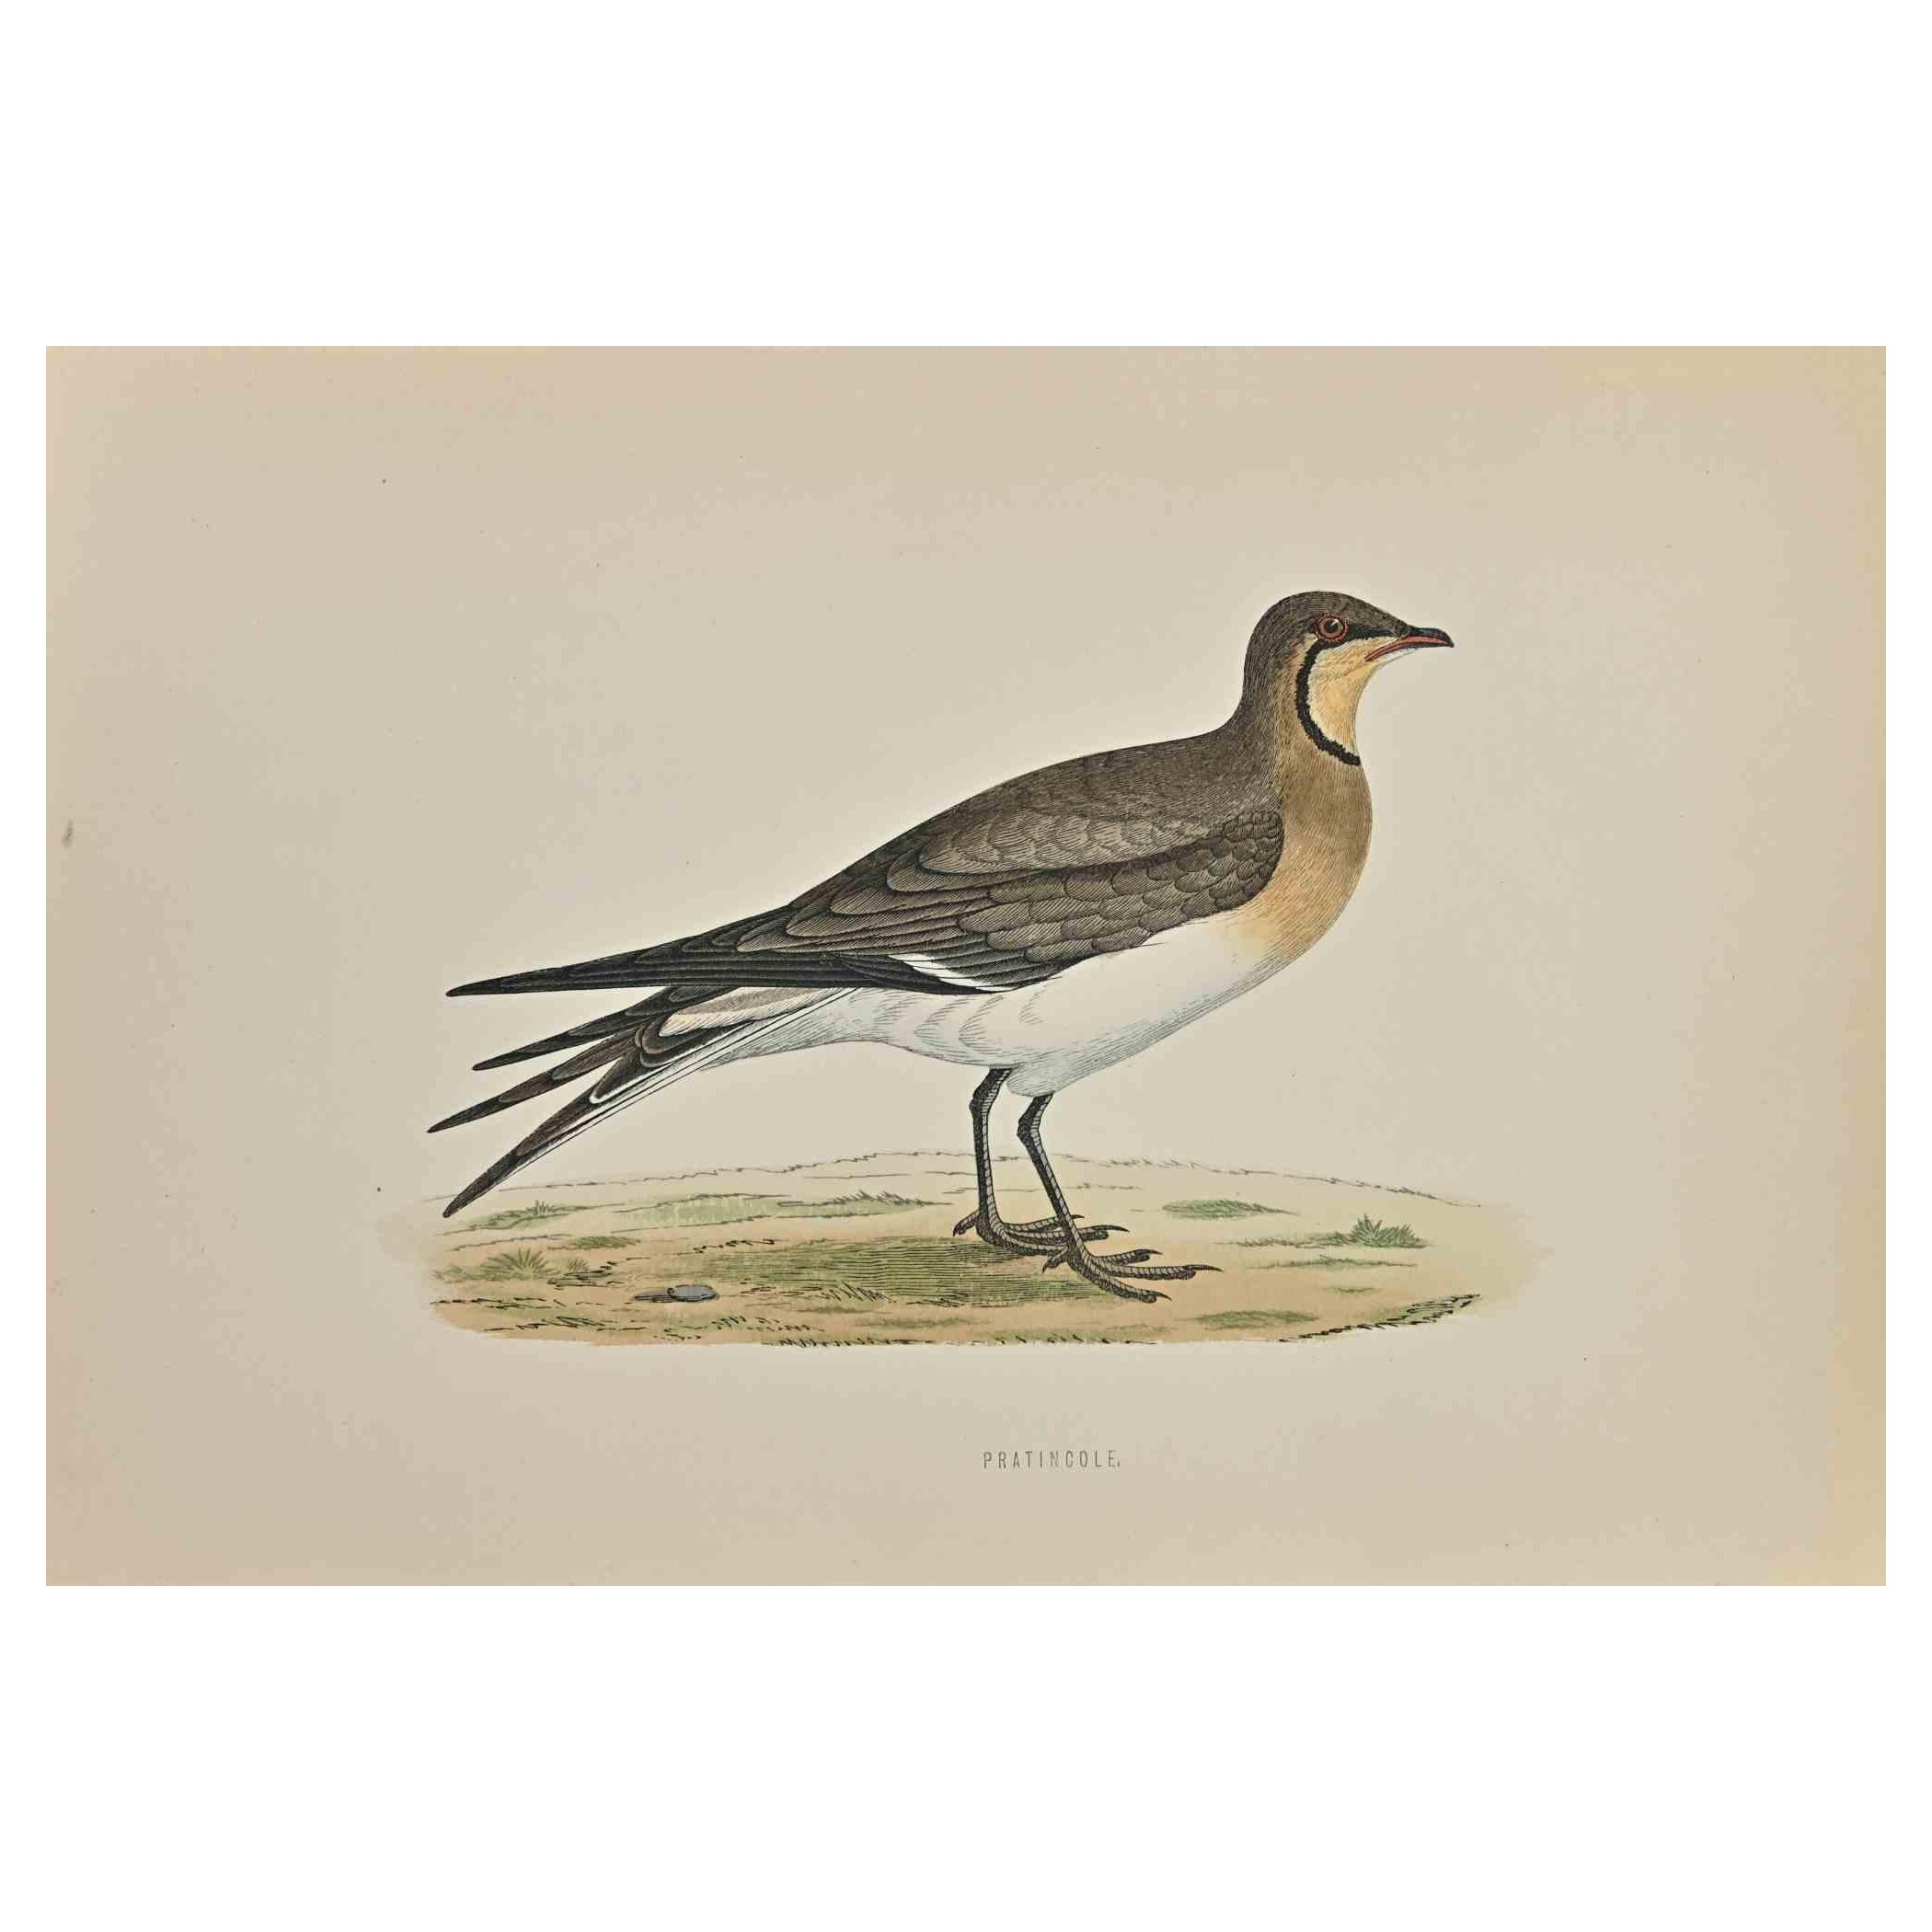 Pratincole is a modern artwork realized in 1870 by the British artist Alexander Francis Lydon (1836-1917) . 

Woodcut print, hand colored, published by London, Bell & Sons, 1870.  Name of the bird printed in plate. This work is part of a print suite